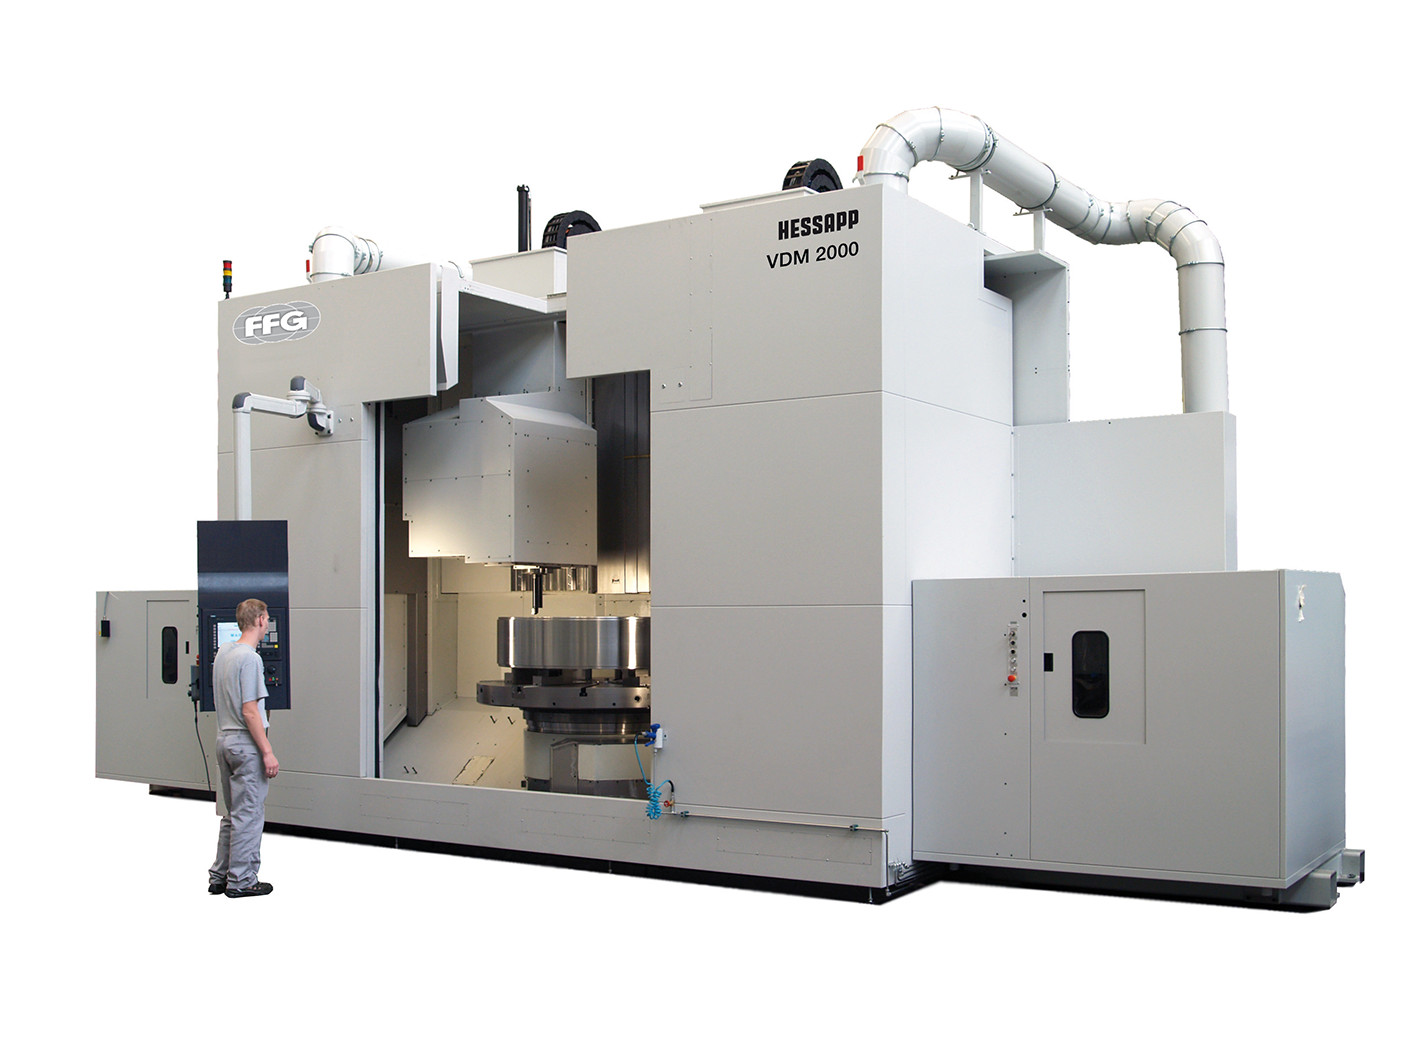 New generation of our vertical turning centers for 5-axis